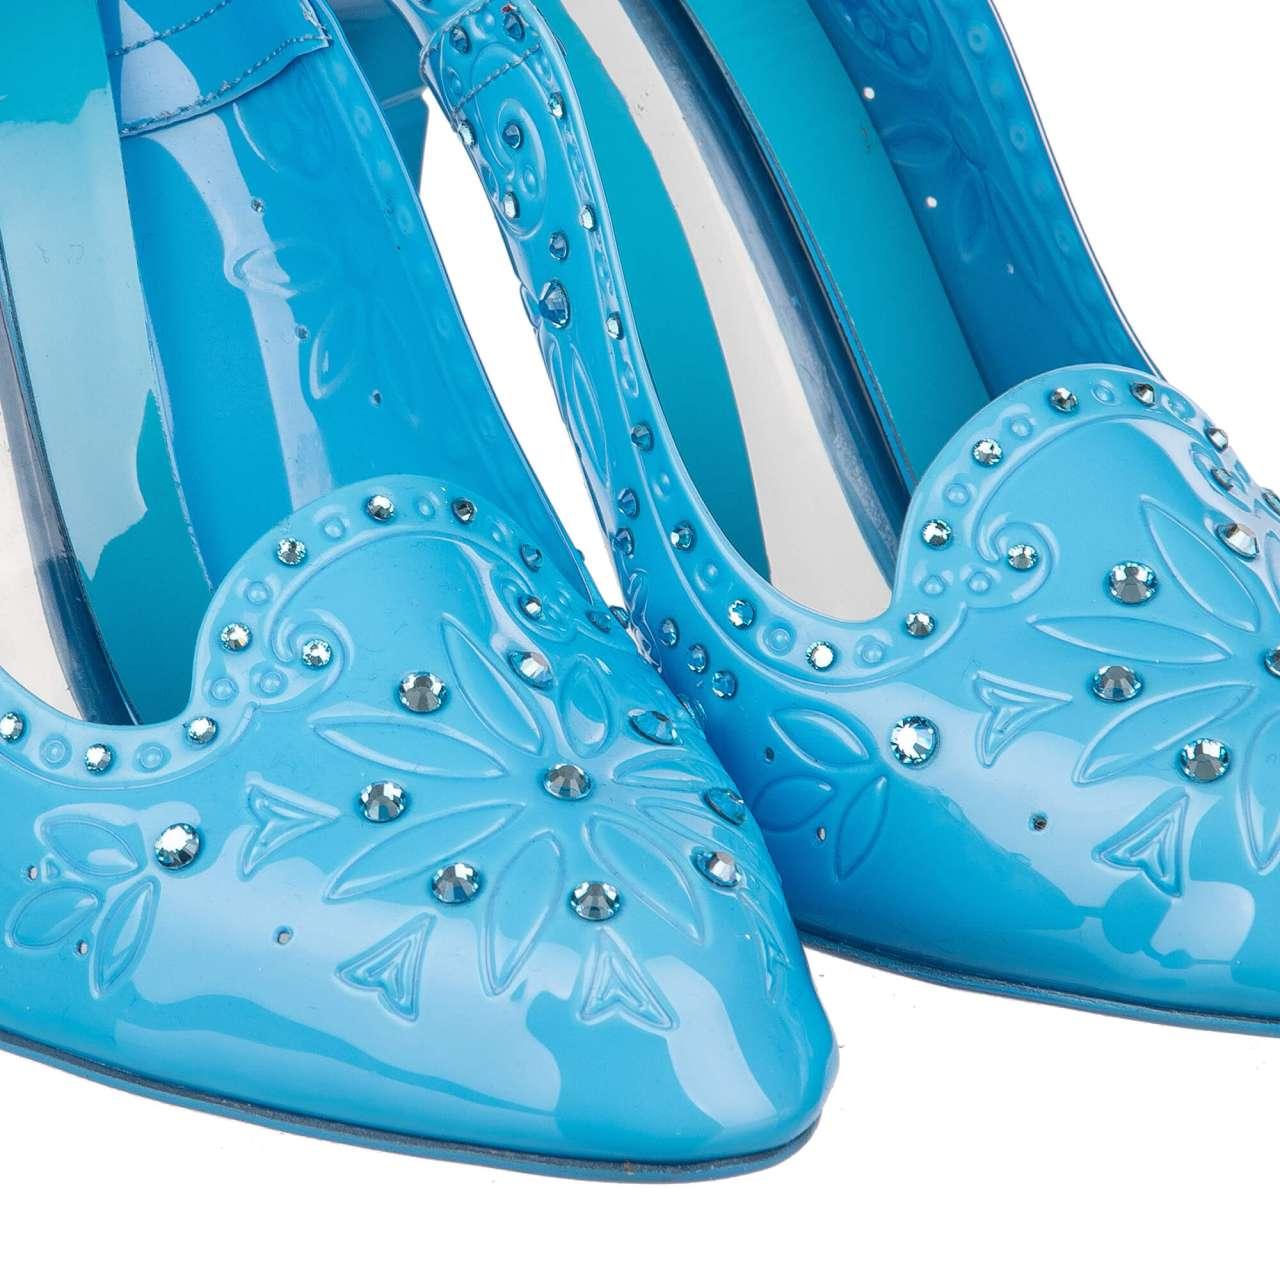 Dolce & Gabbana - Cinderella PVC Crystals Pumps Turquoise Blue 39 9 For Sale 1